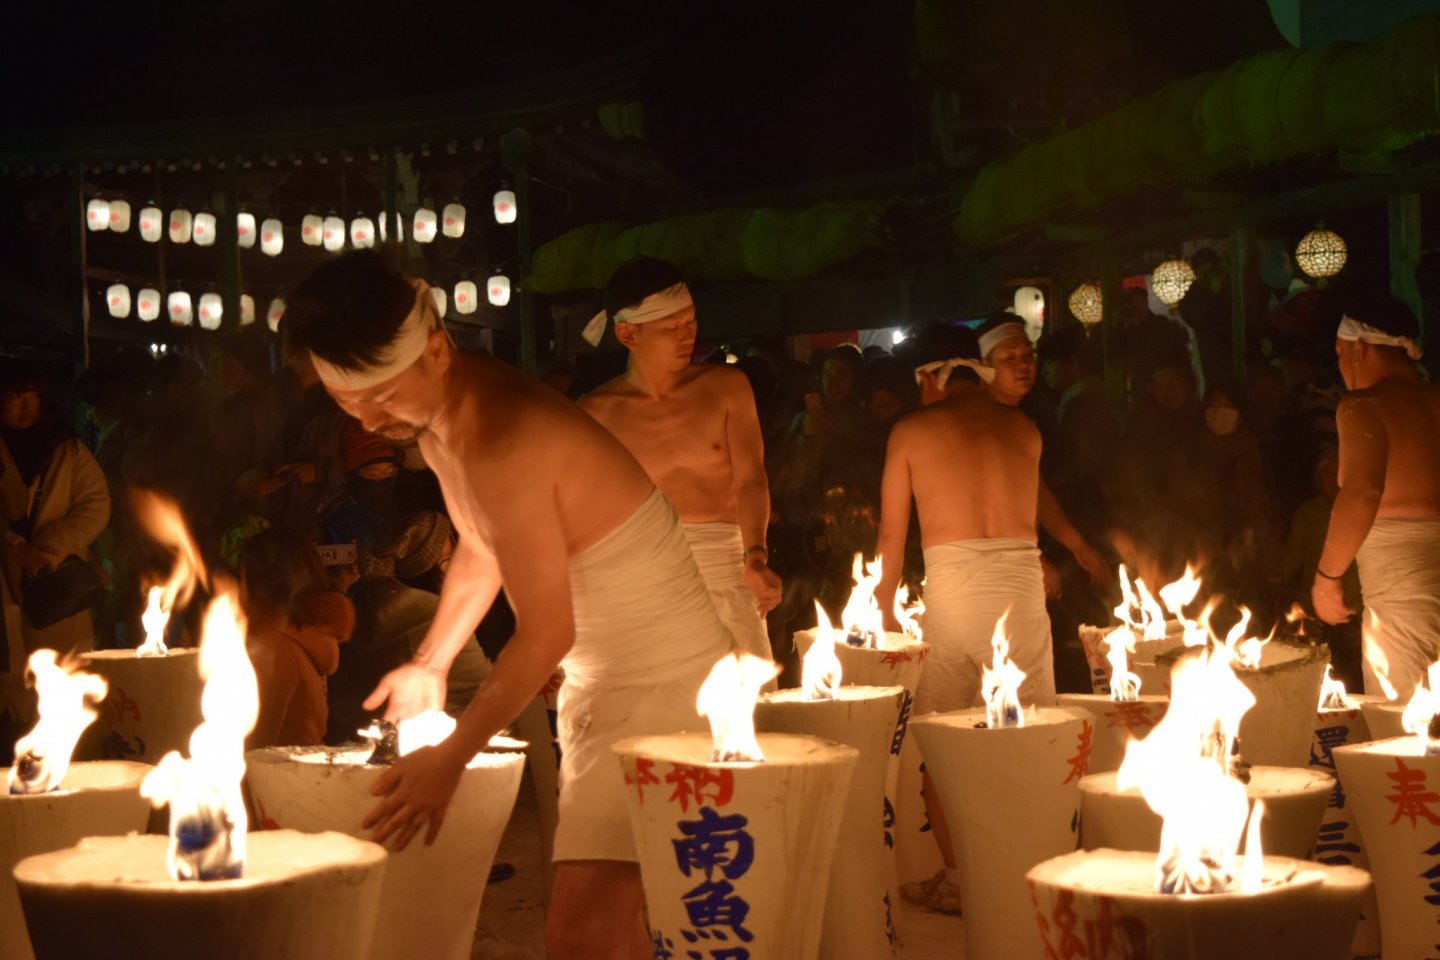 Urasa\'s Naked Pushing Festival is one of Japan\'s most unique events